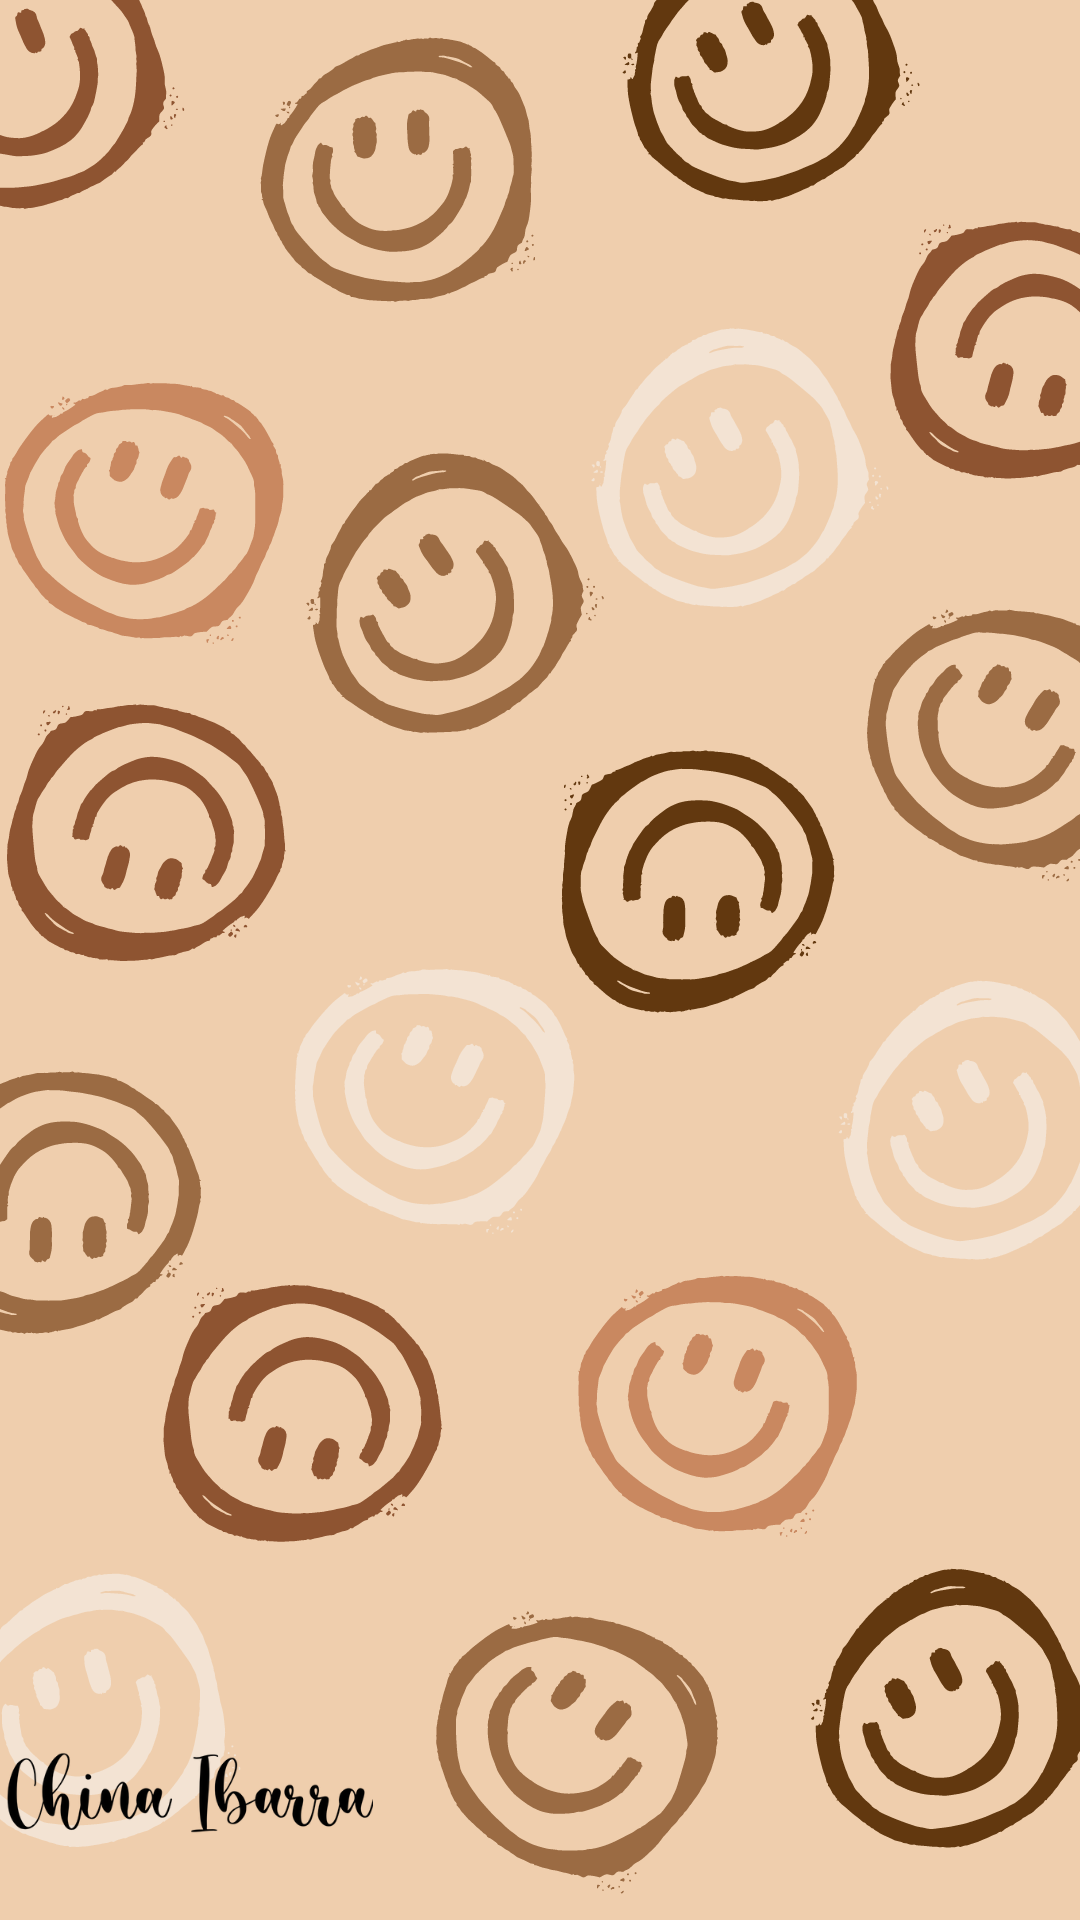 Happy face. Wallpaper iphone love, iPhone wallpaper vintage, iPhone wallpaper pattern